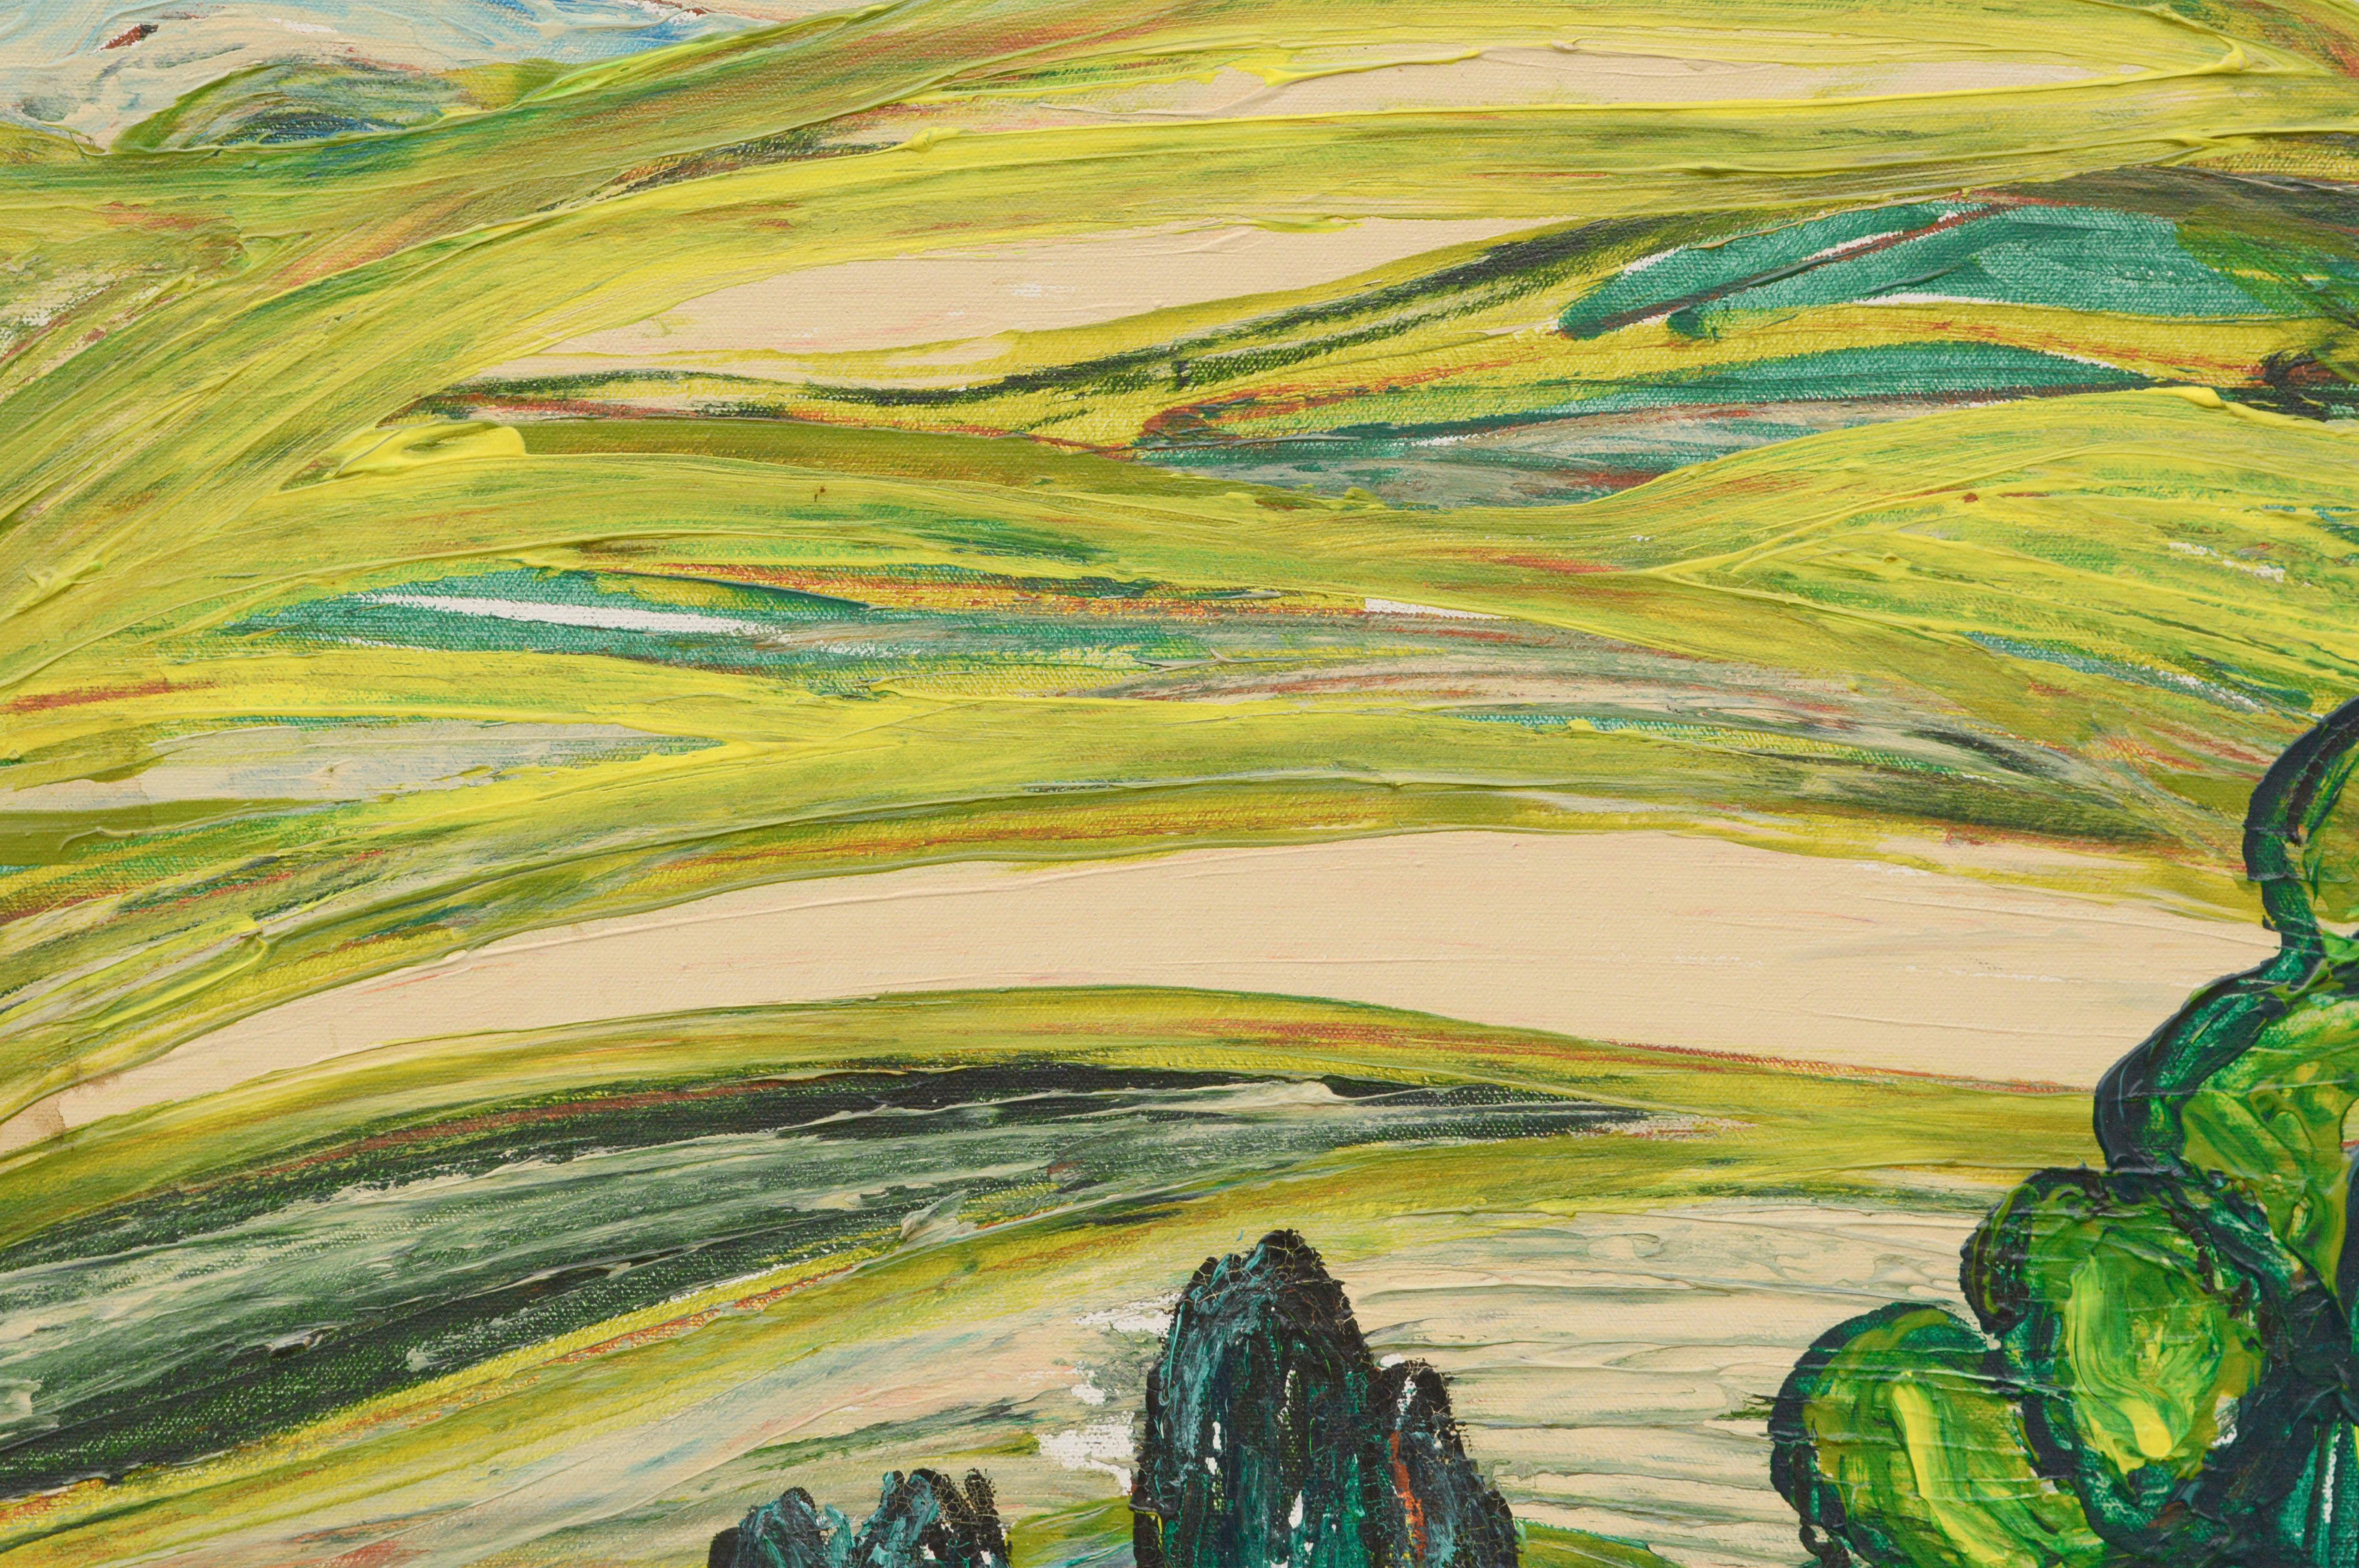 Modernist Rolling Hills Countryside Landscape - Painting by Allie William Skelton